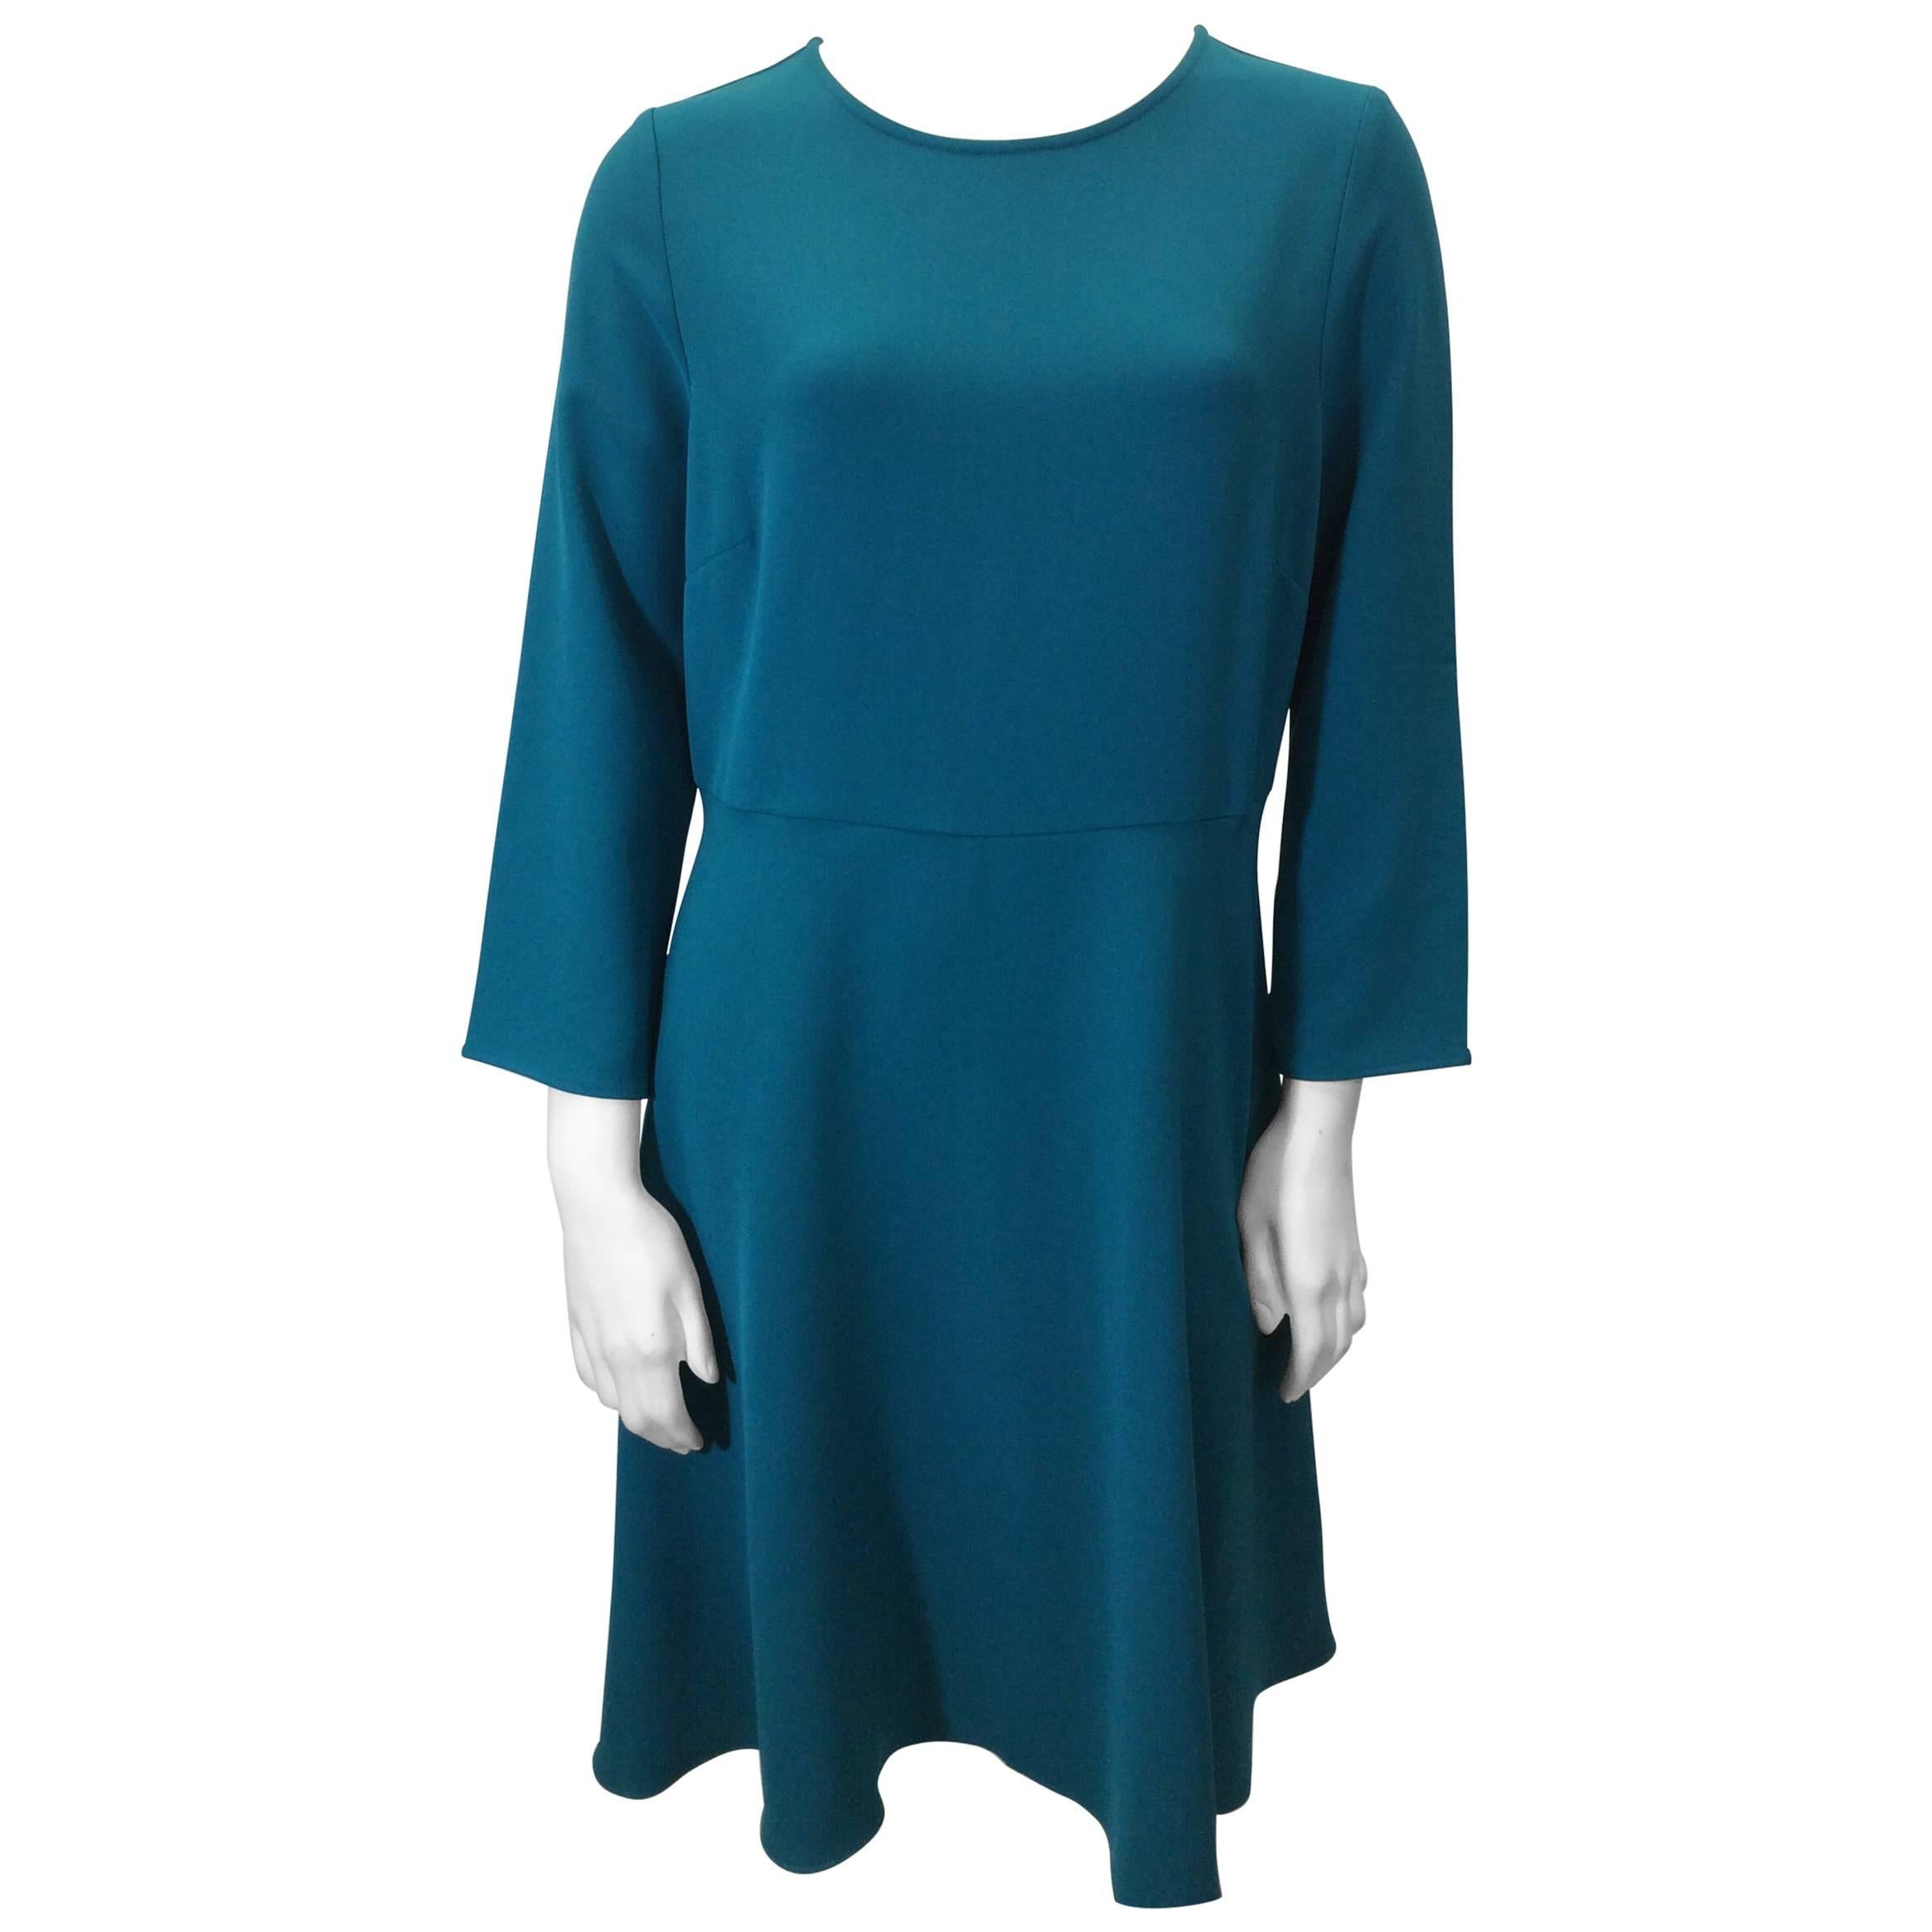 Parosh Teal Skater Style Dress with 3/4 Sleeves For Sale